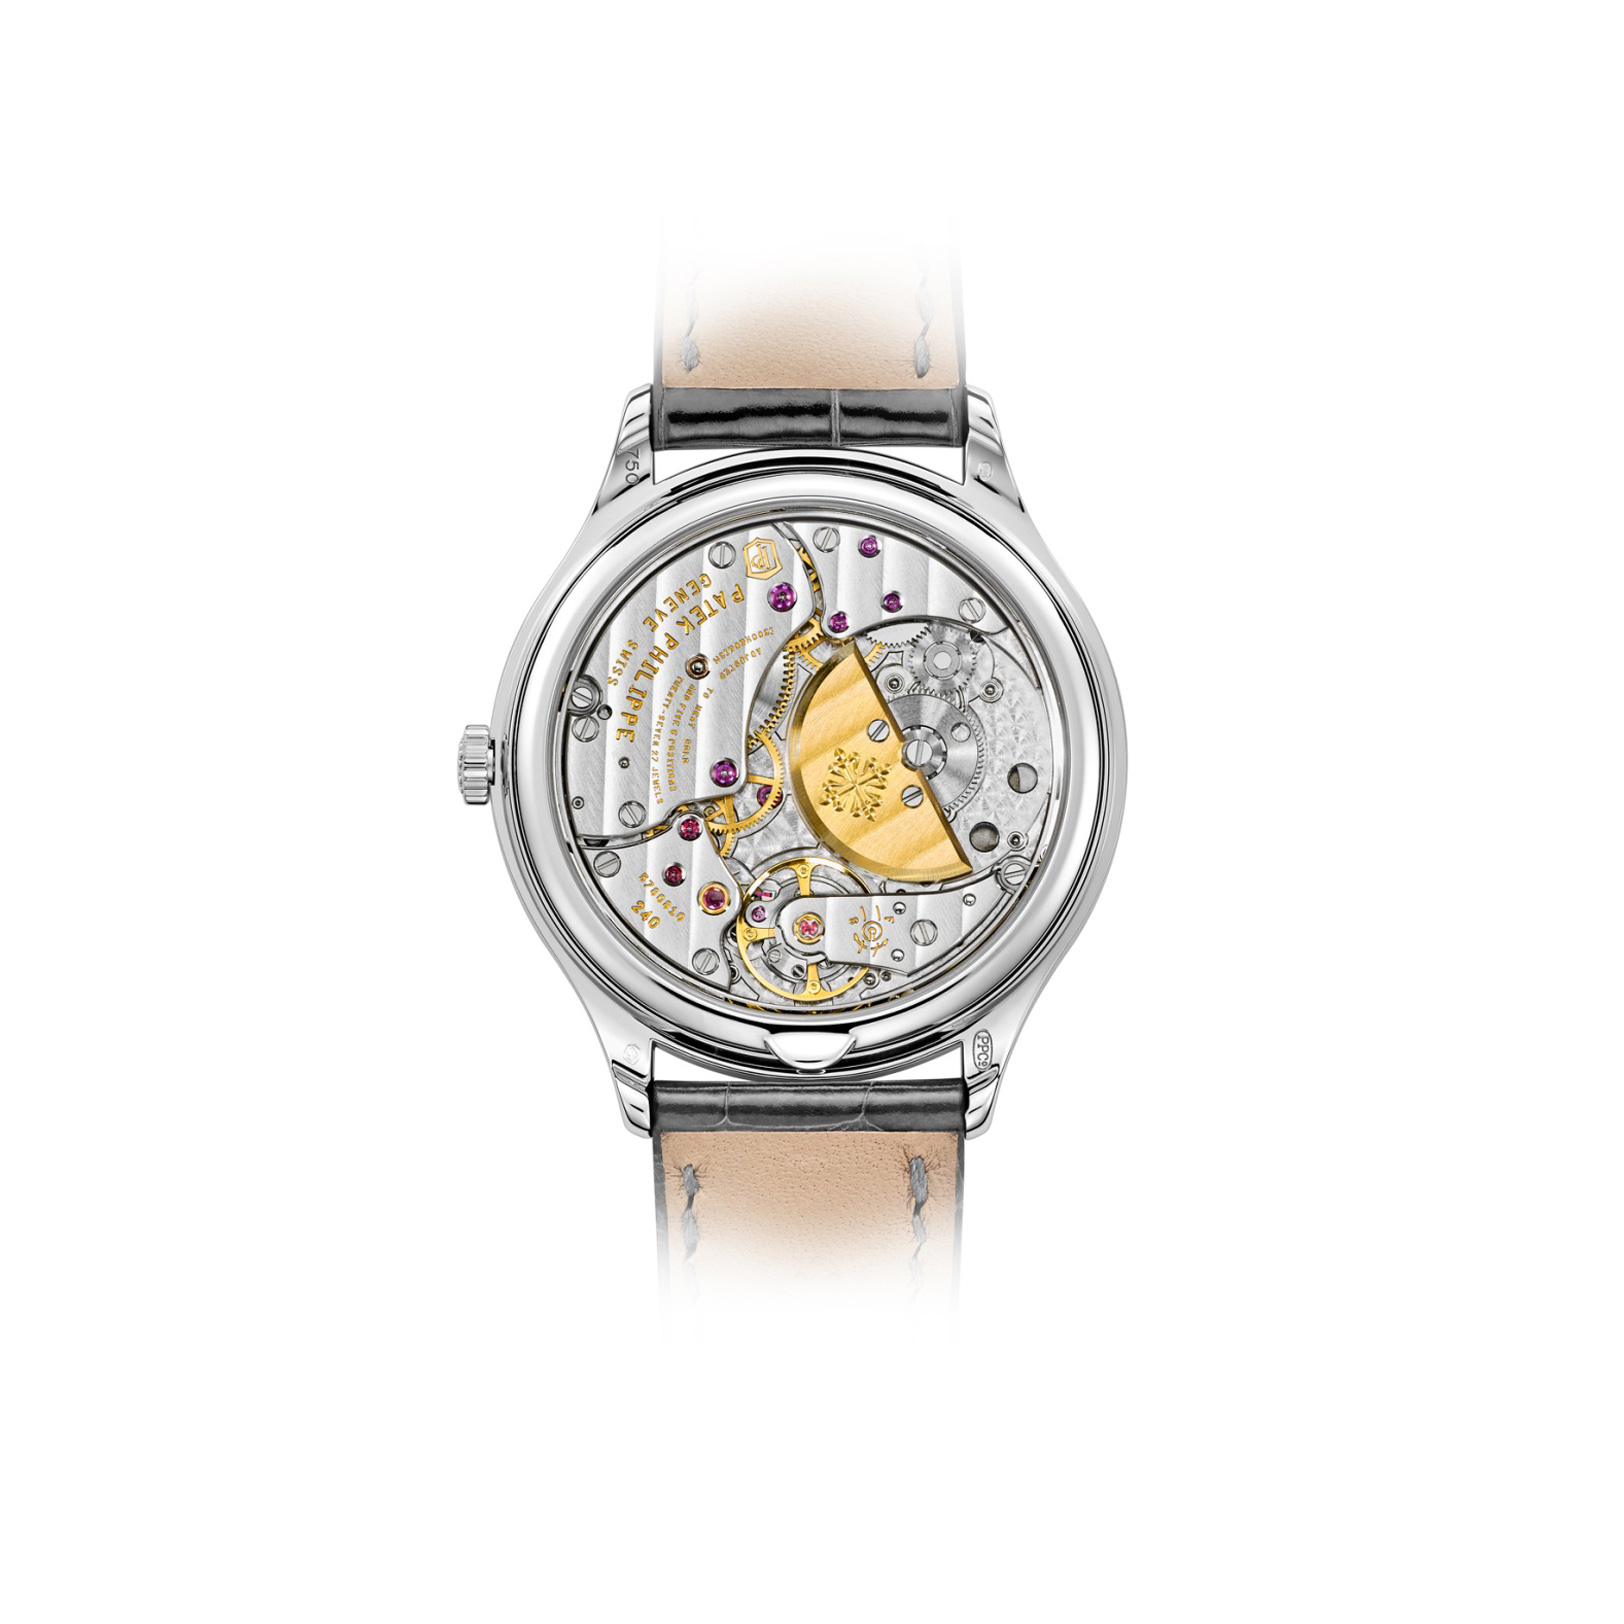 Grand Complications White Gold Ladies First Perpetual Calendar gallery 1